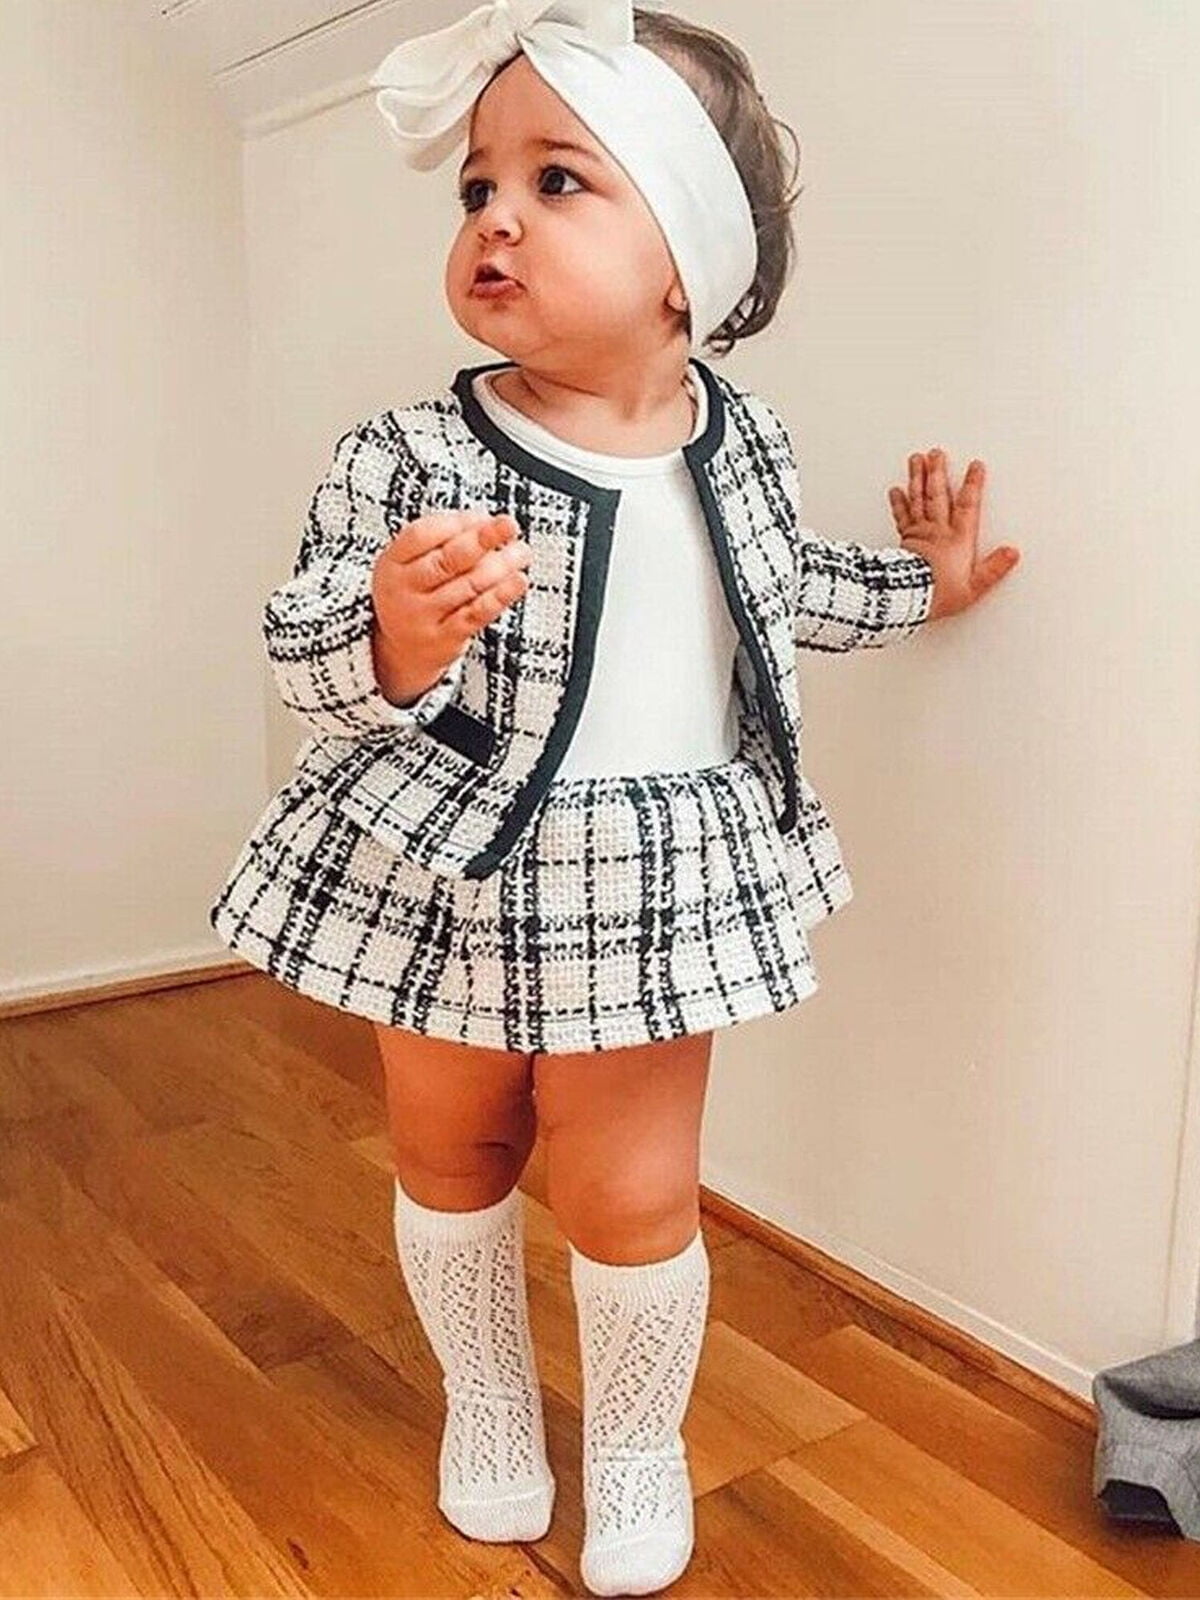 Infant Toddler Baby Girls Dress Long Sleeve Plaid Patchwork Tutu Skirt Party Princess Casual Outfit Clothes 